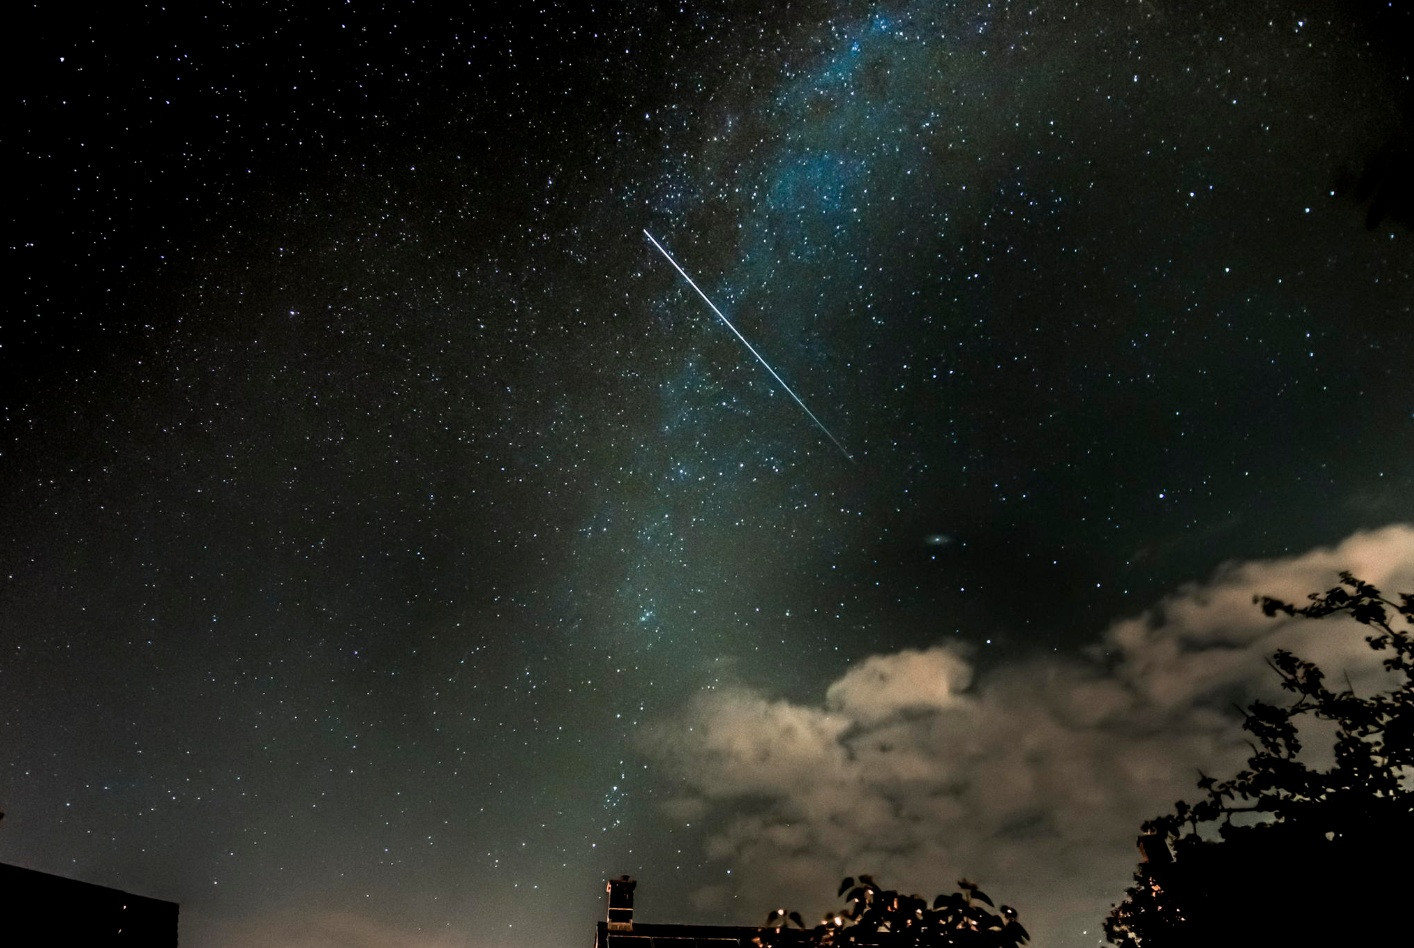 International Space Station shooting across the Milky Way in UK